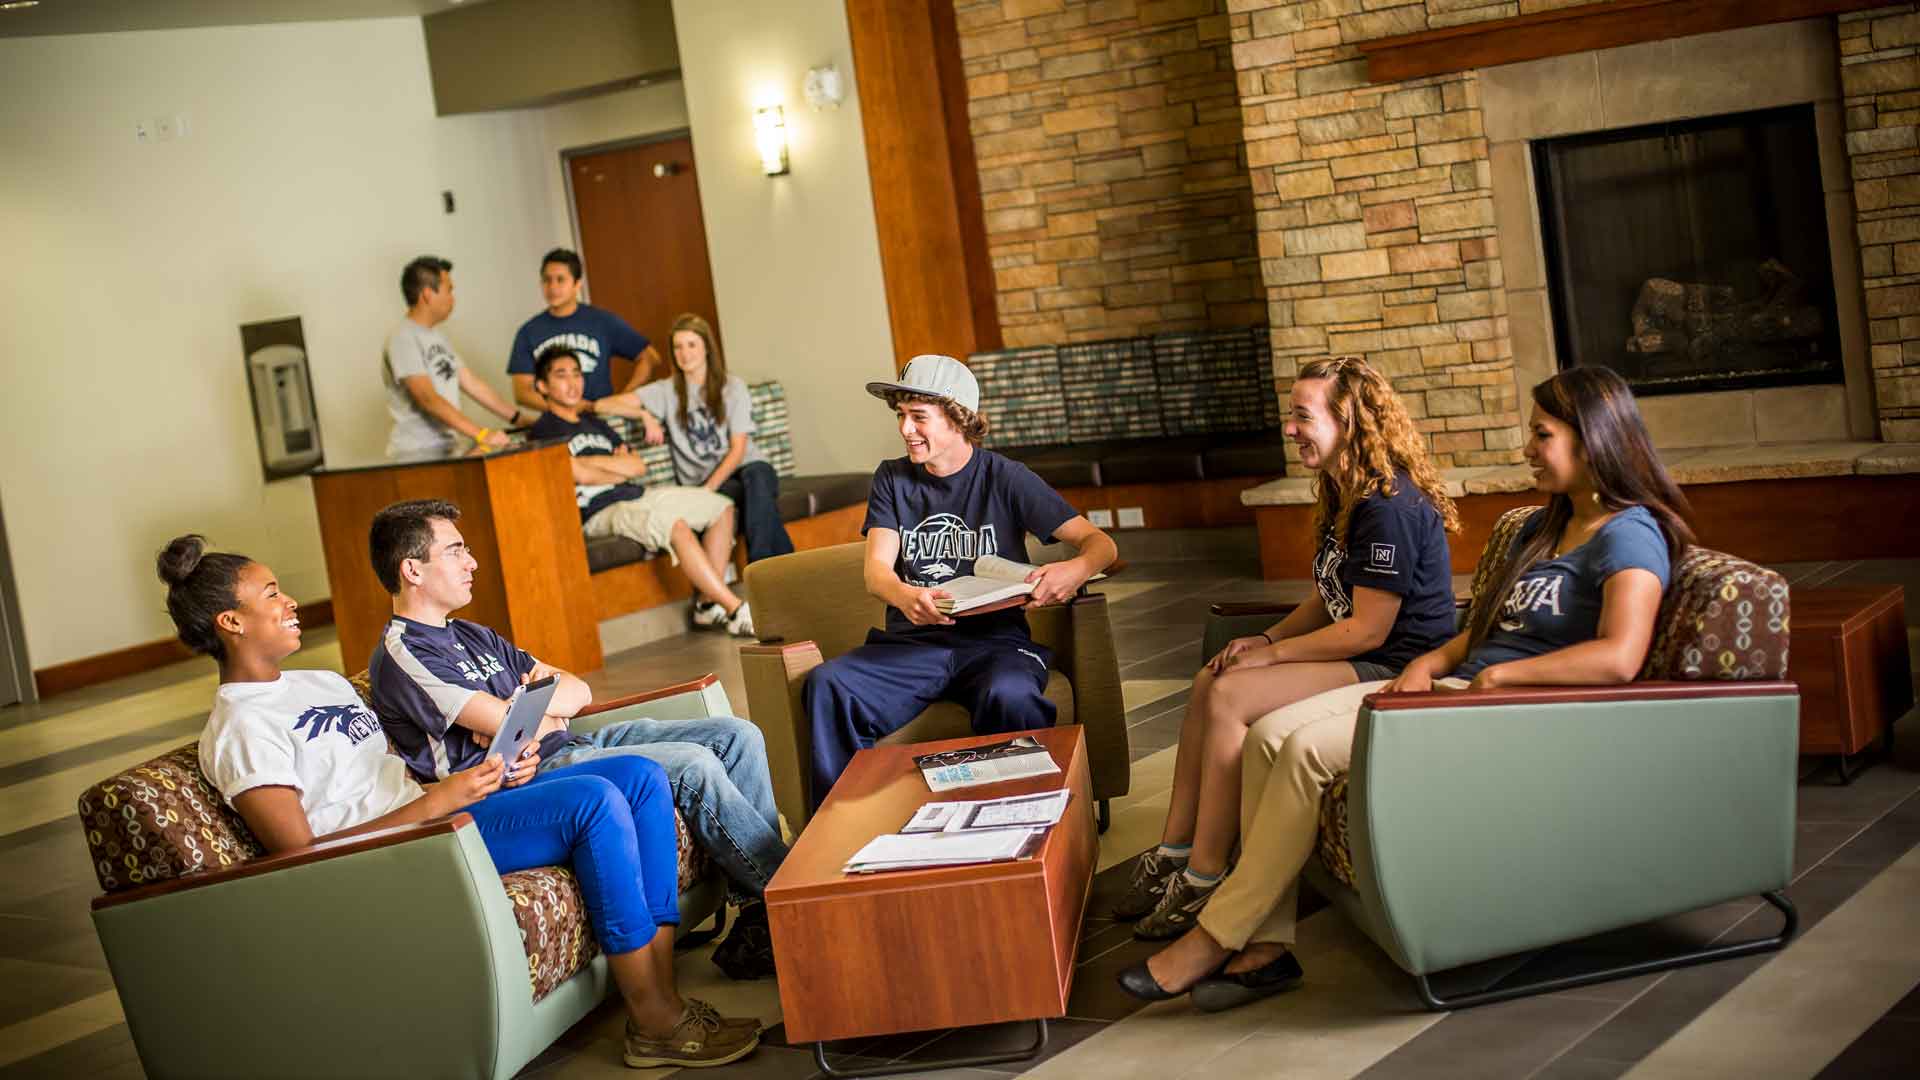 Students in the dorm lounge area